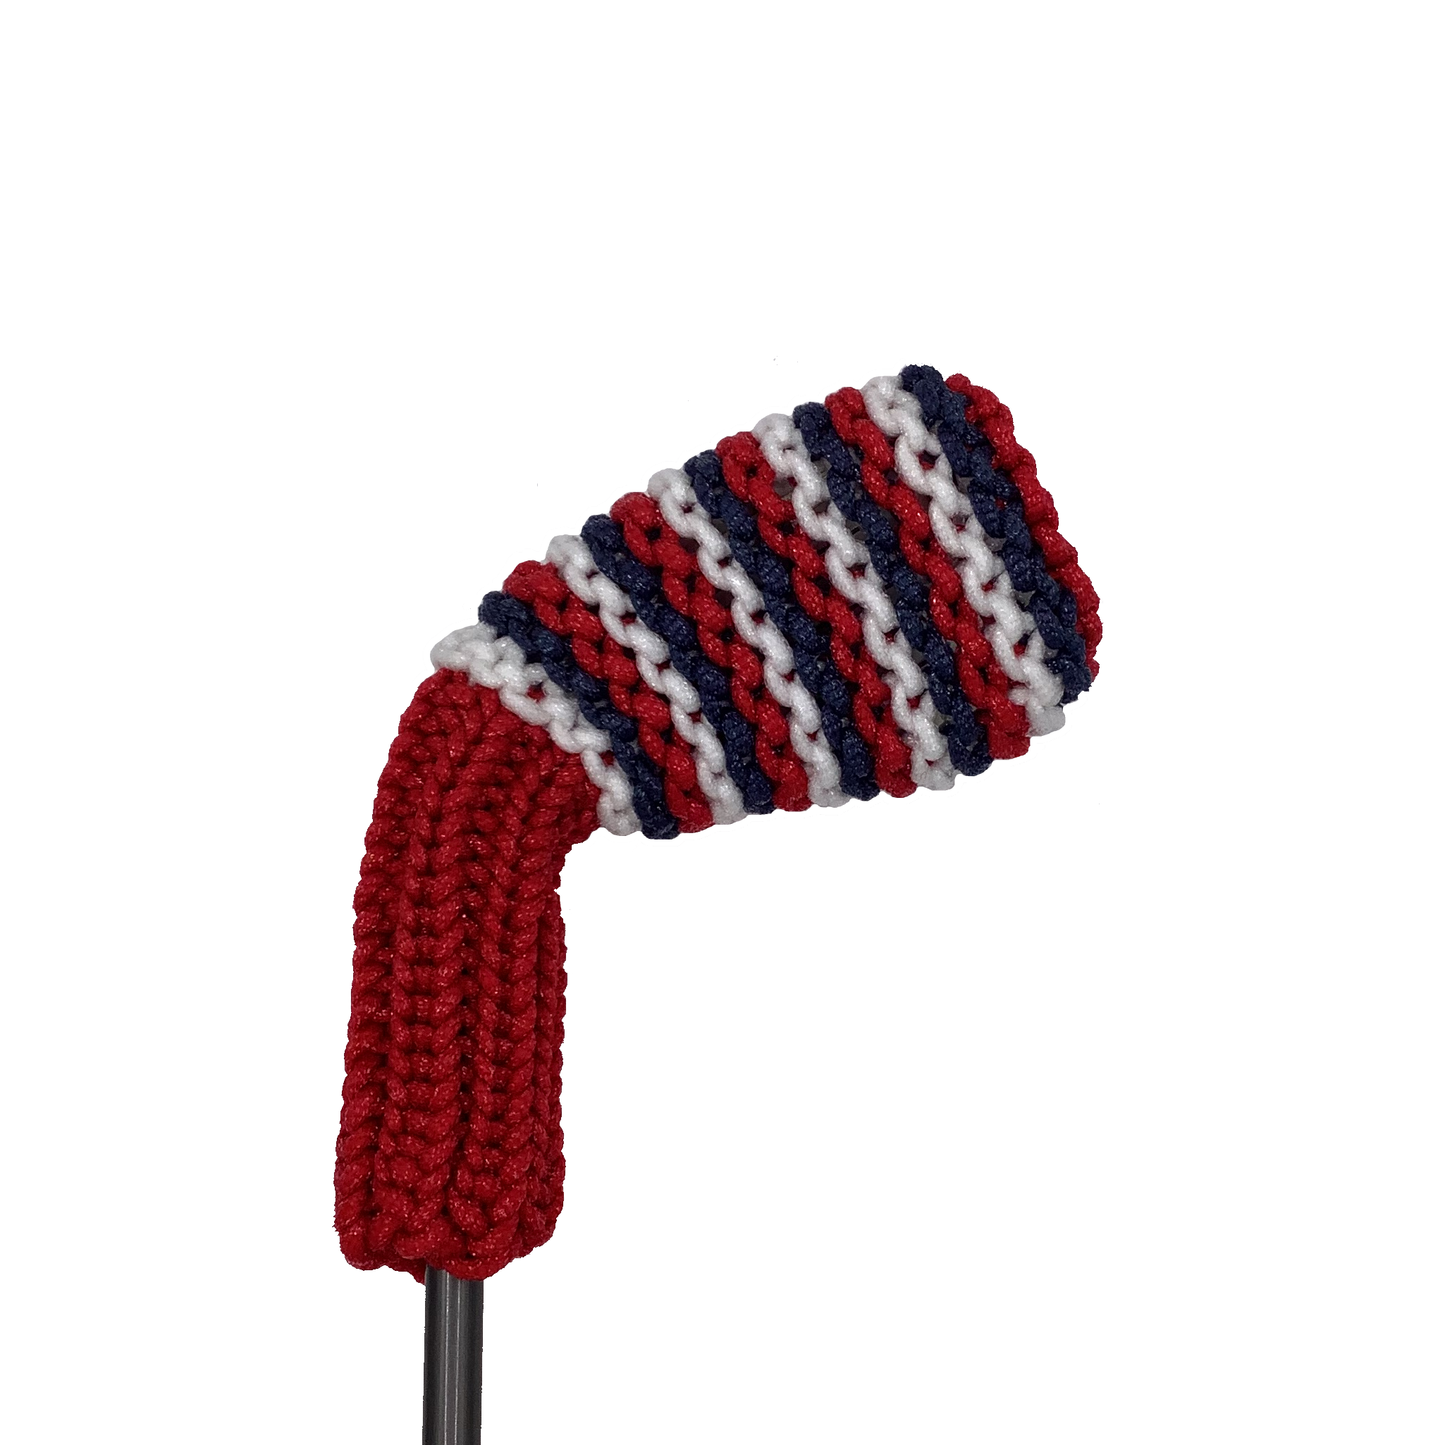 Clean Shot™ iron golf club headcover in red with red, navy blue and white small size stripes. Perfect for a wedge or other iron.